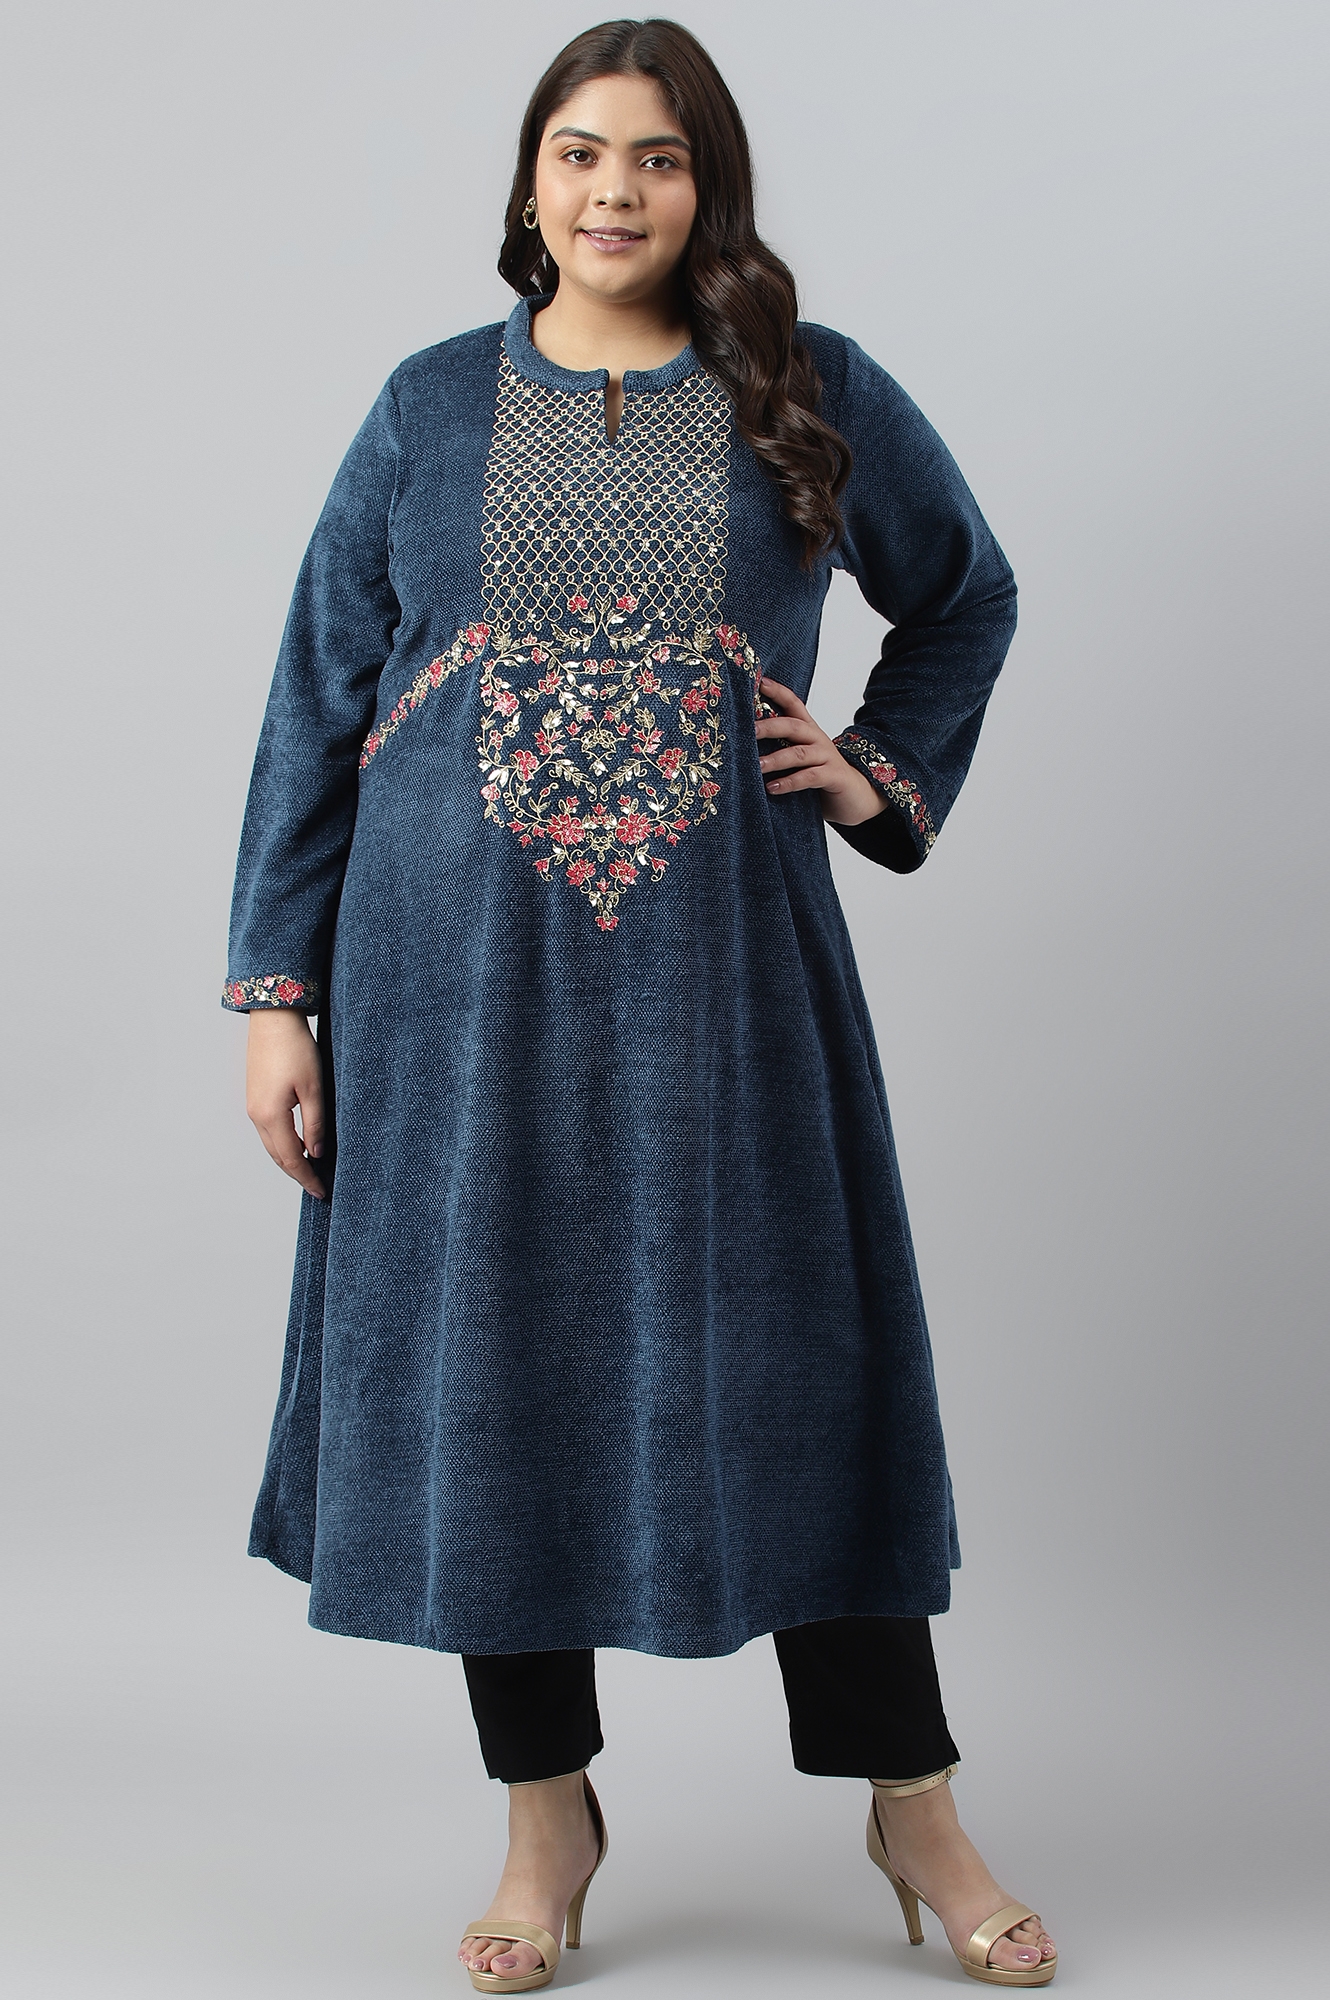 W for Woman Blue Printed Winter Kurta with Embroidery_22NOW18349-312471_S :  Amazon.in: Fashion